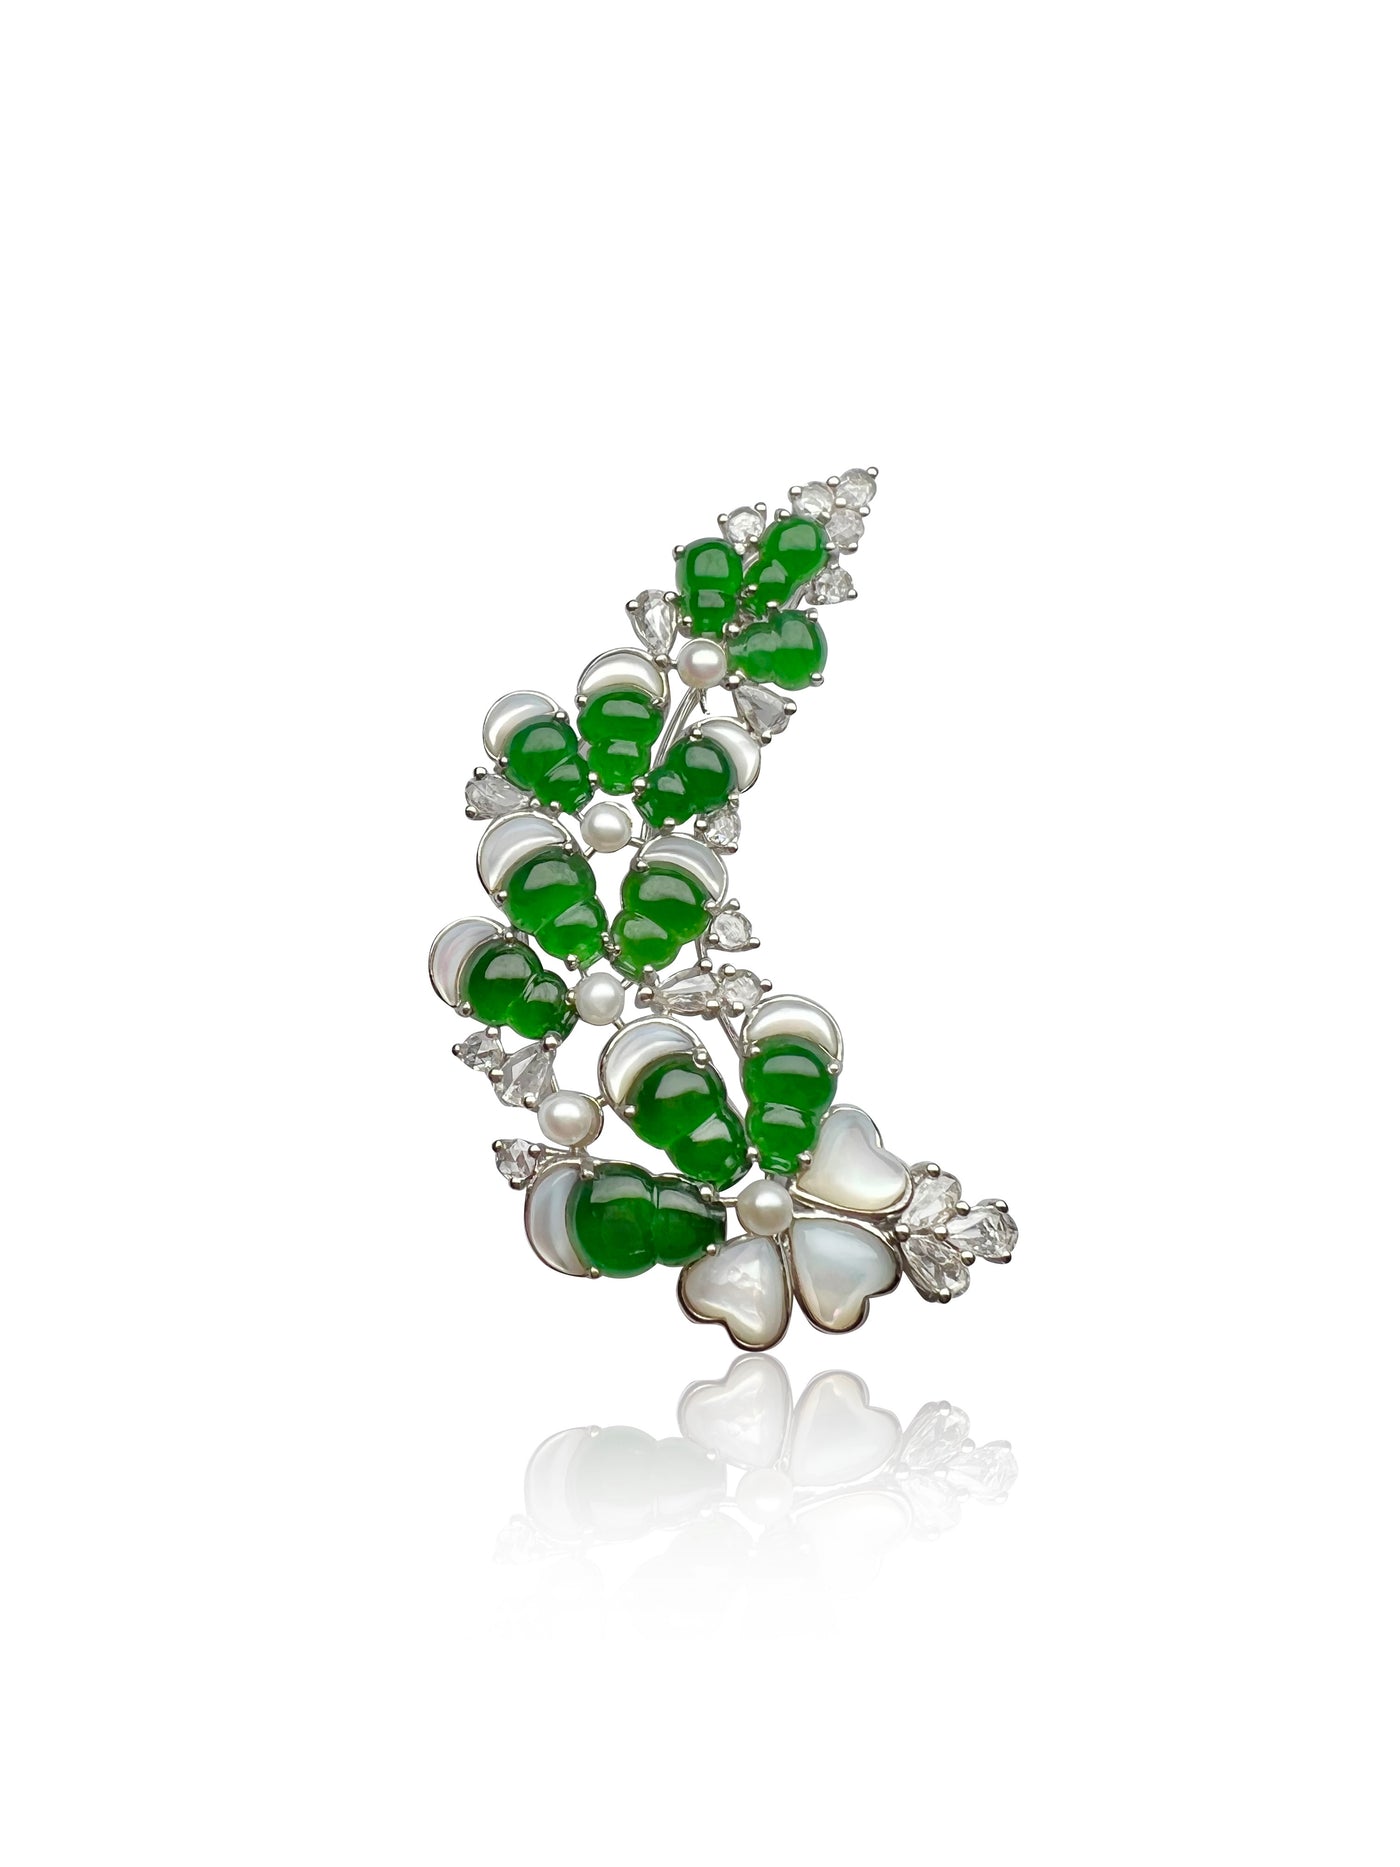 Lavender Jadeite brooch  in 18K white gold with diamonds and mother of pearl